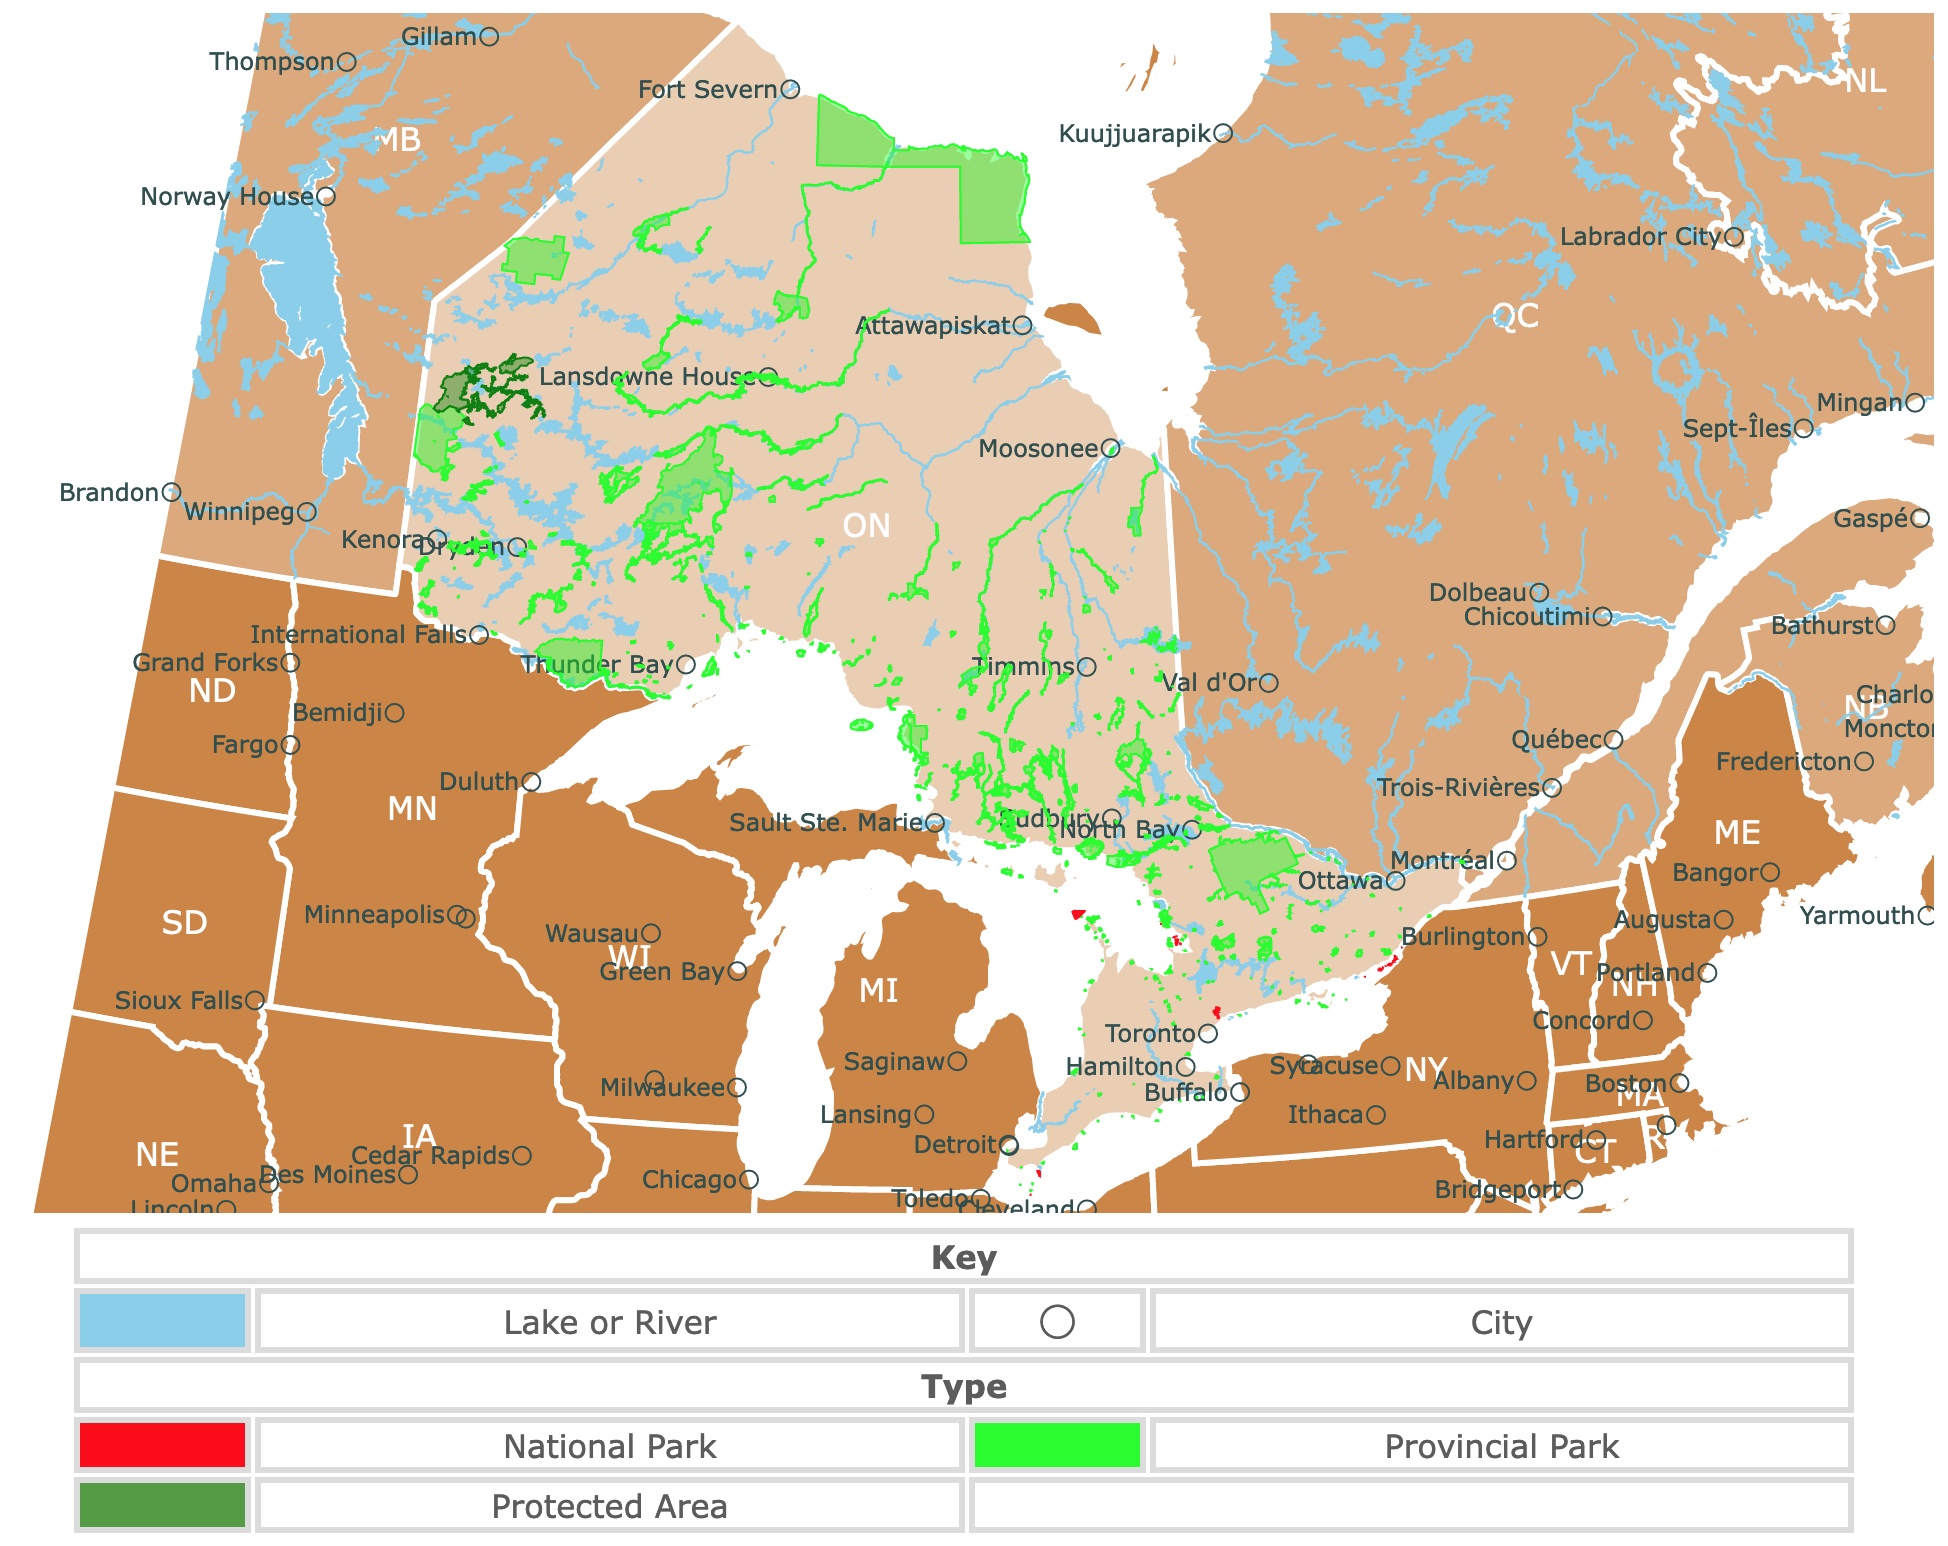 Map of Ontario's state parks, national parks, forests, and public lands areas